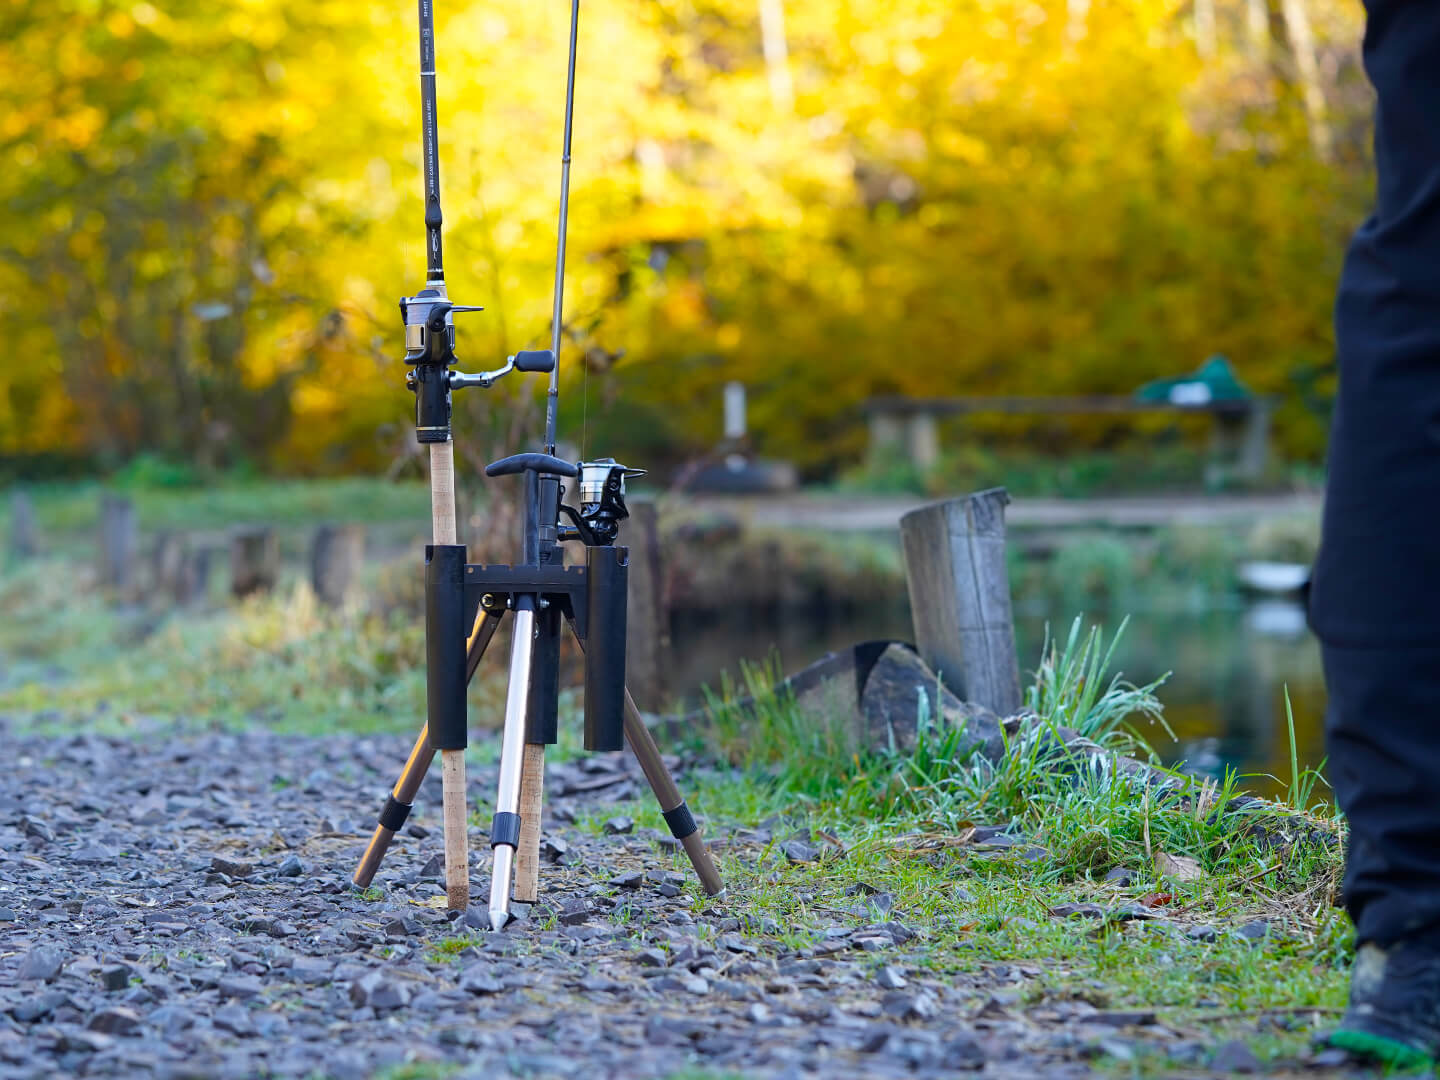 Porte canne SPRO TROUT MASTER Tripod rod stand